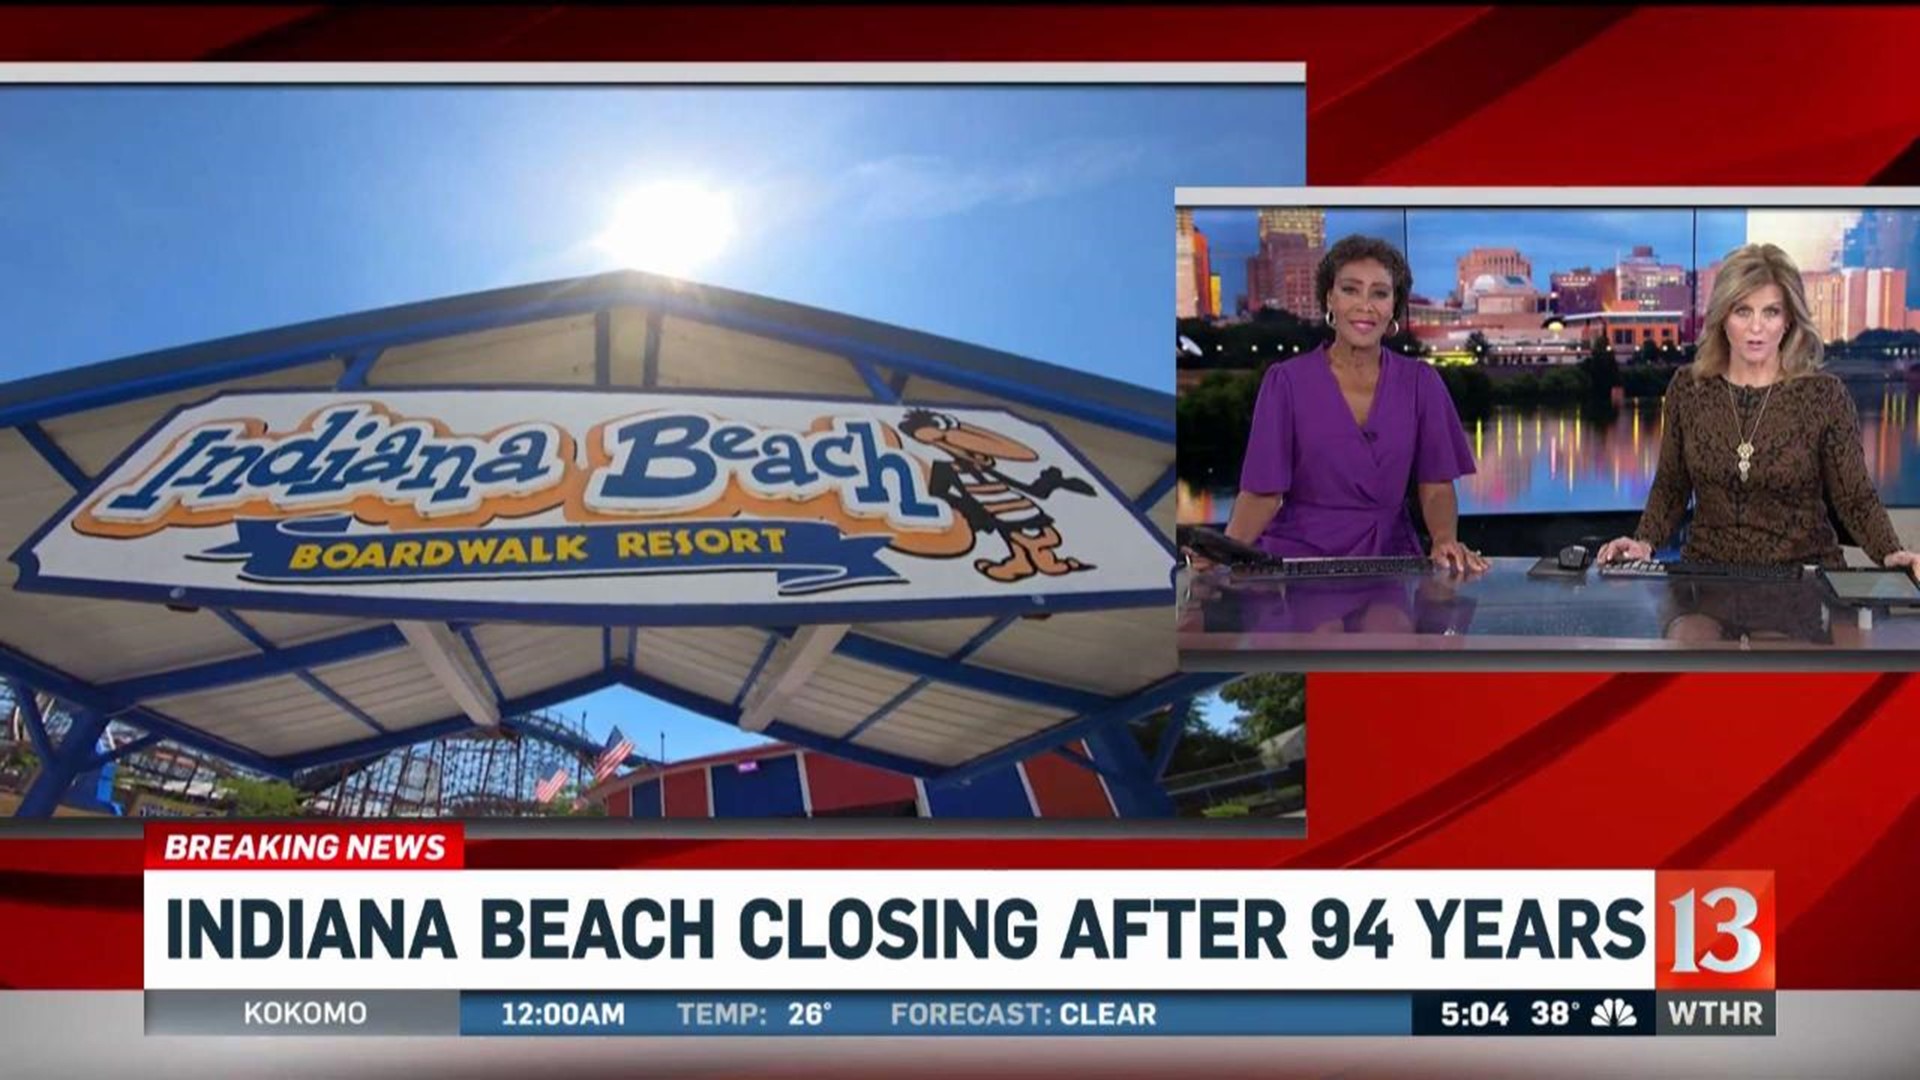 Indiana Beach closing after 94 years